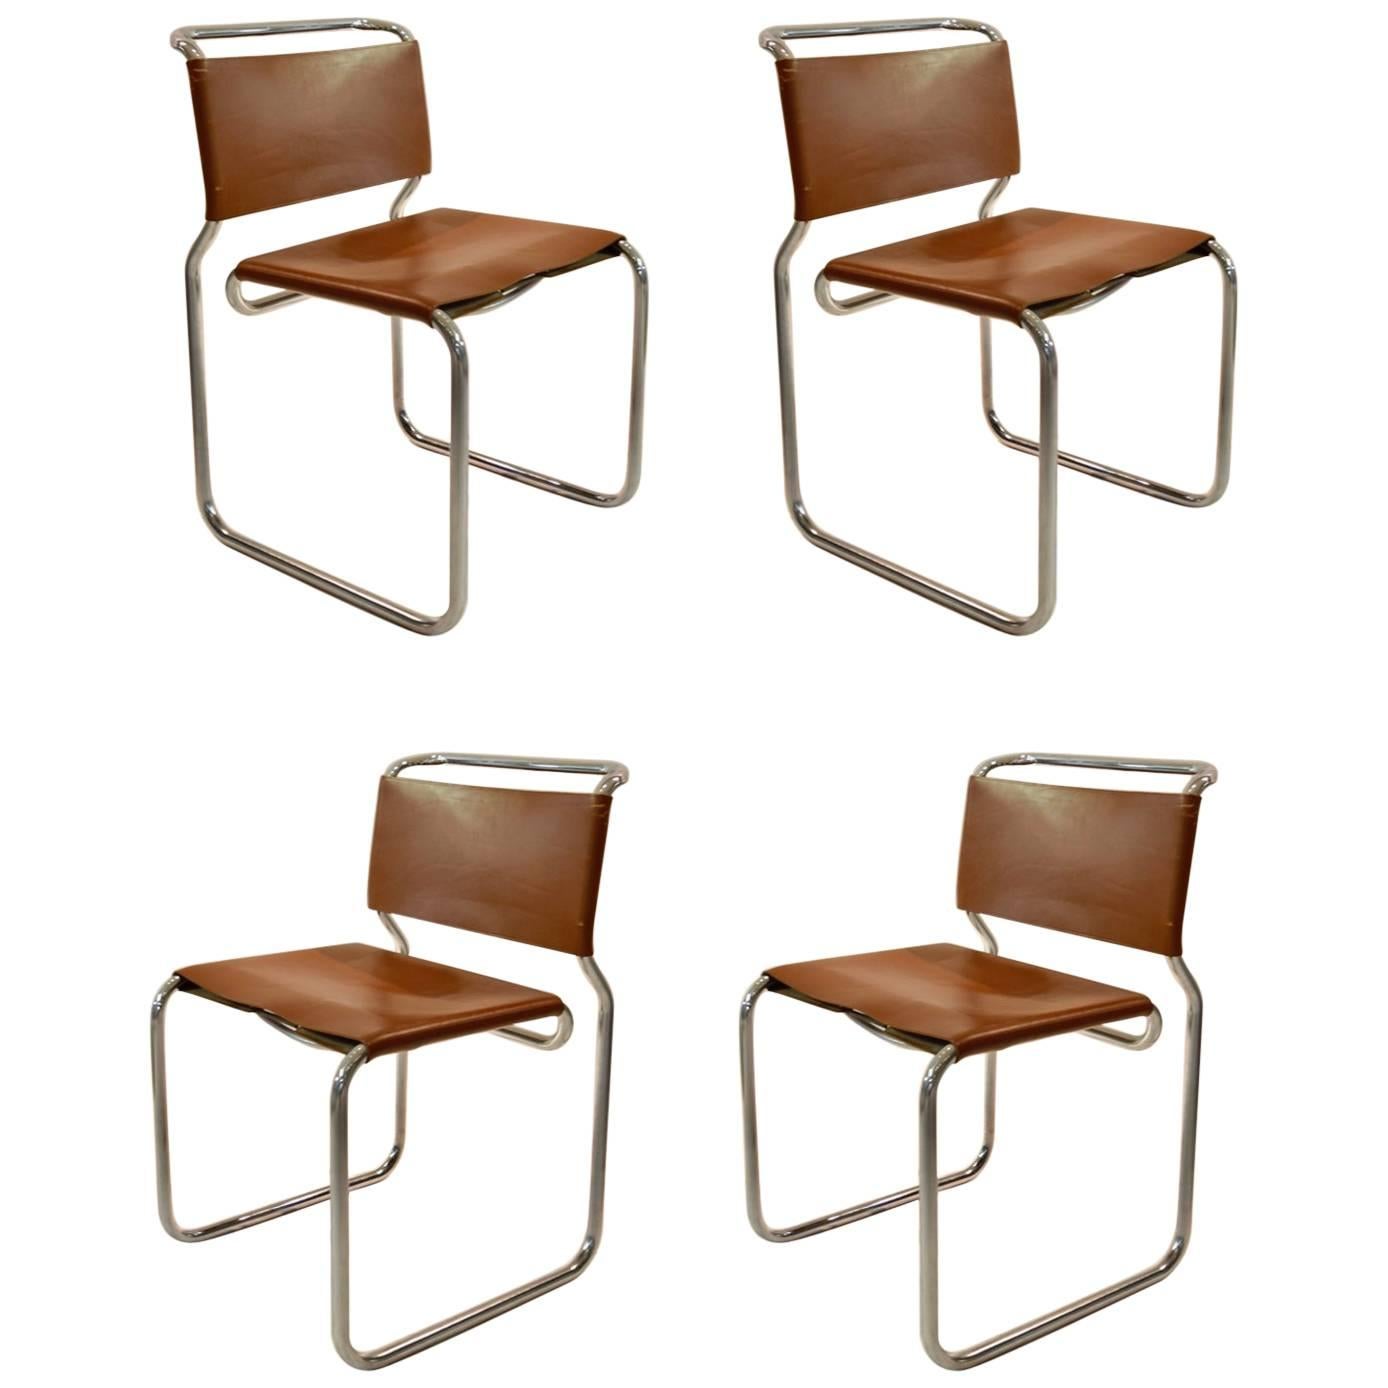 Four Chairs in Leather by Nicos Zographos Designed in 1966, USA